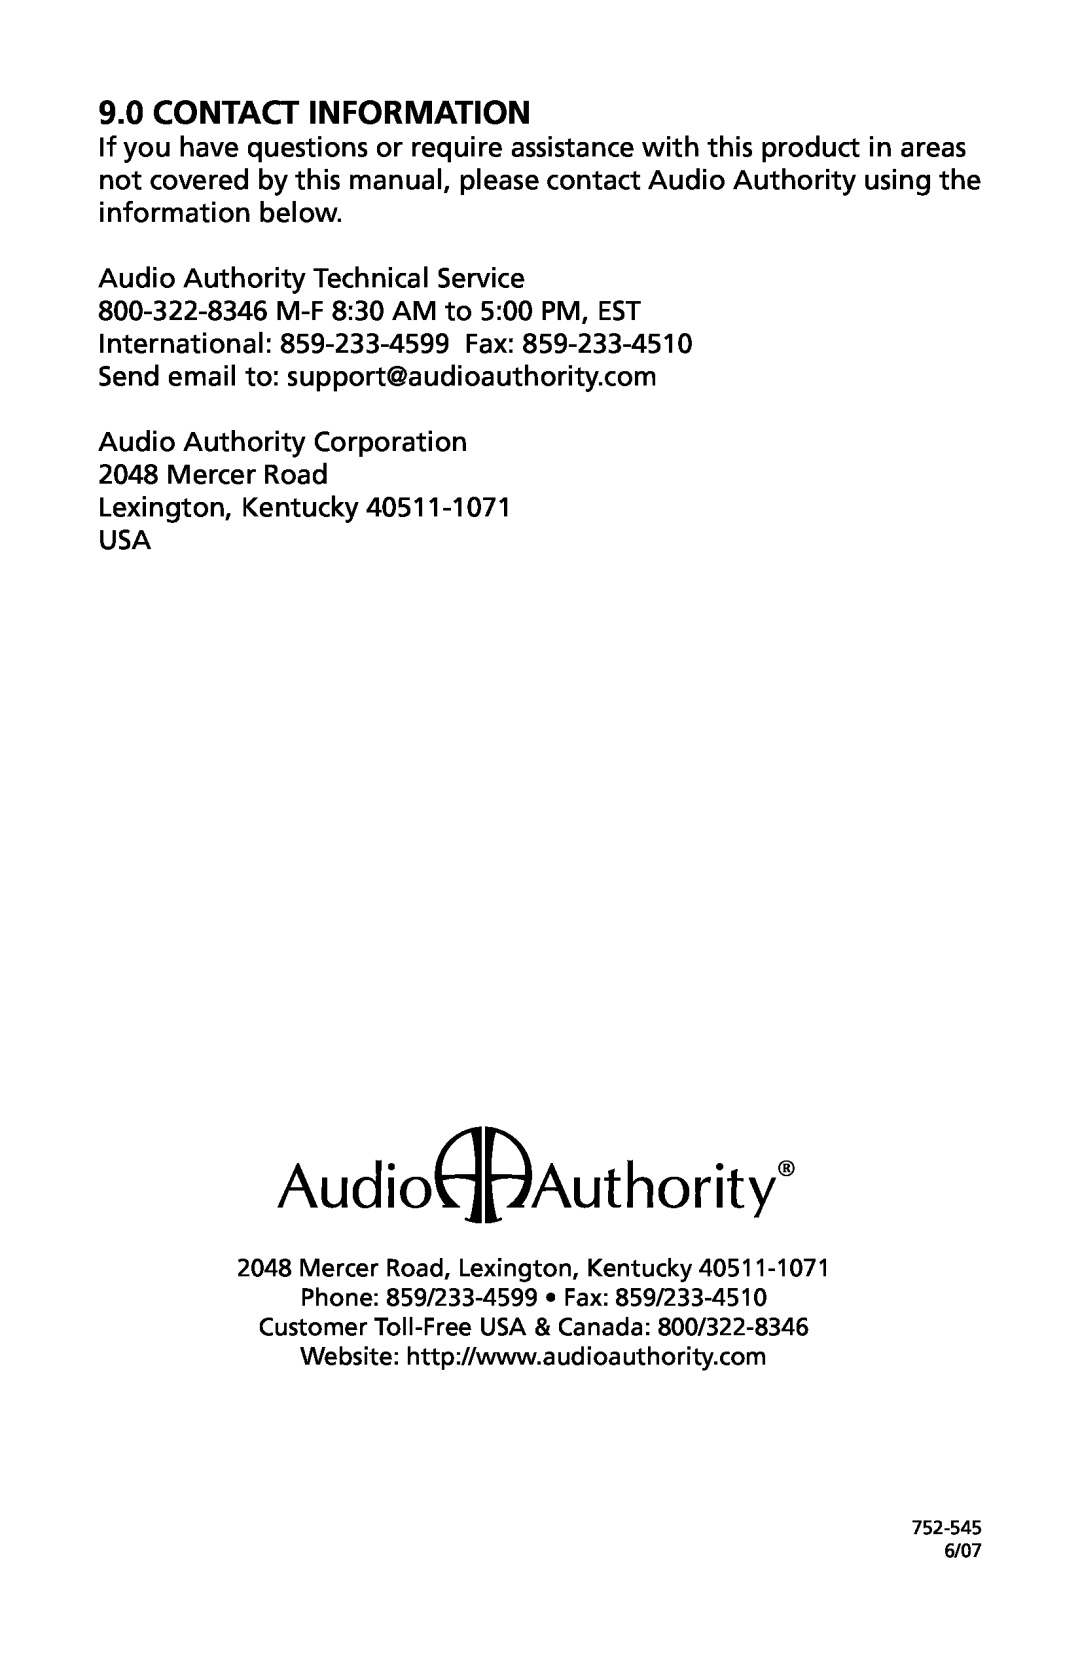 Audio Authority 1185ci user manual Contact Information 